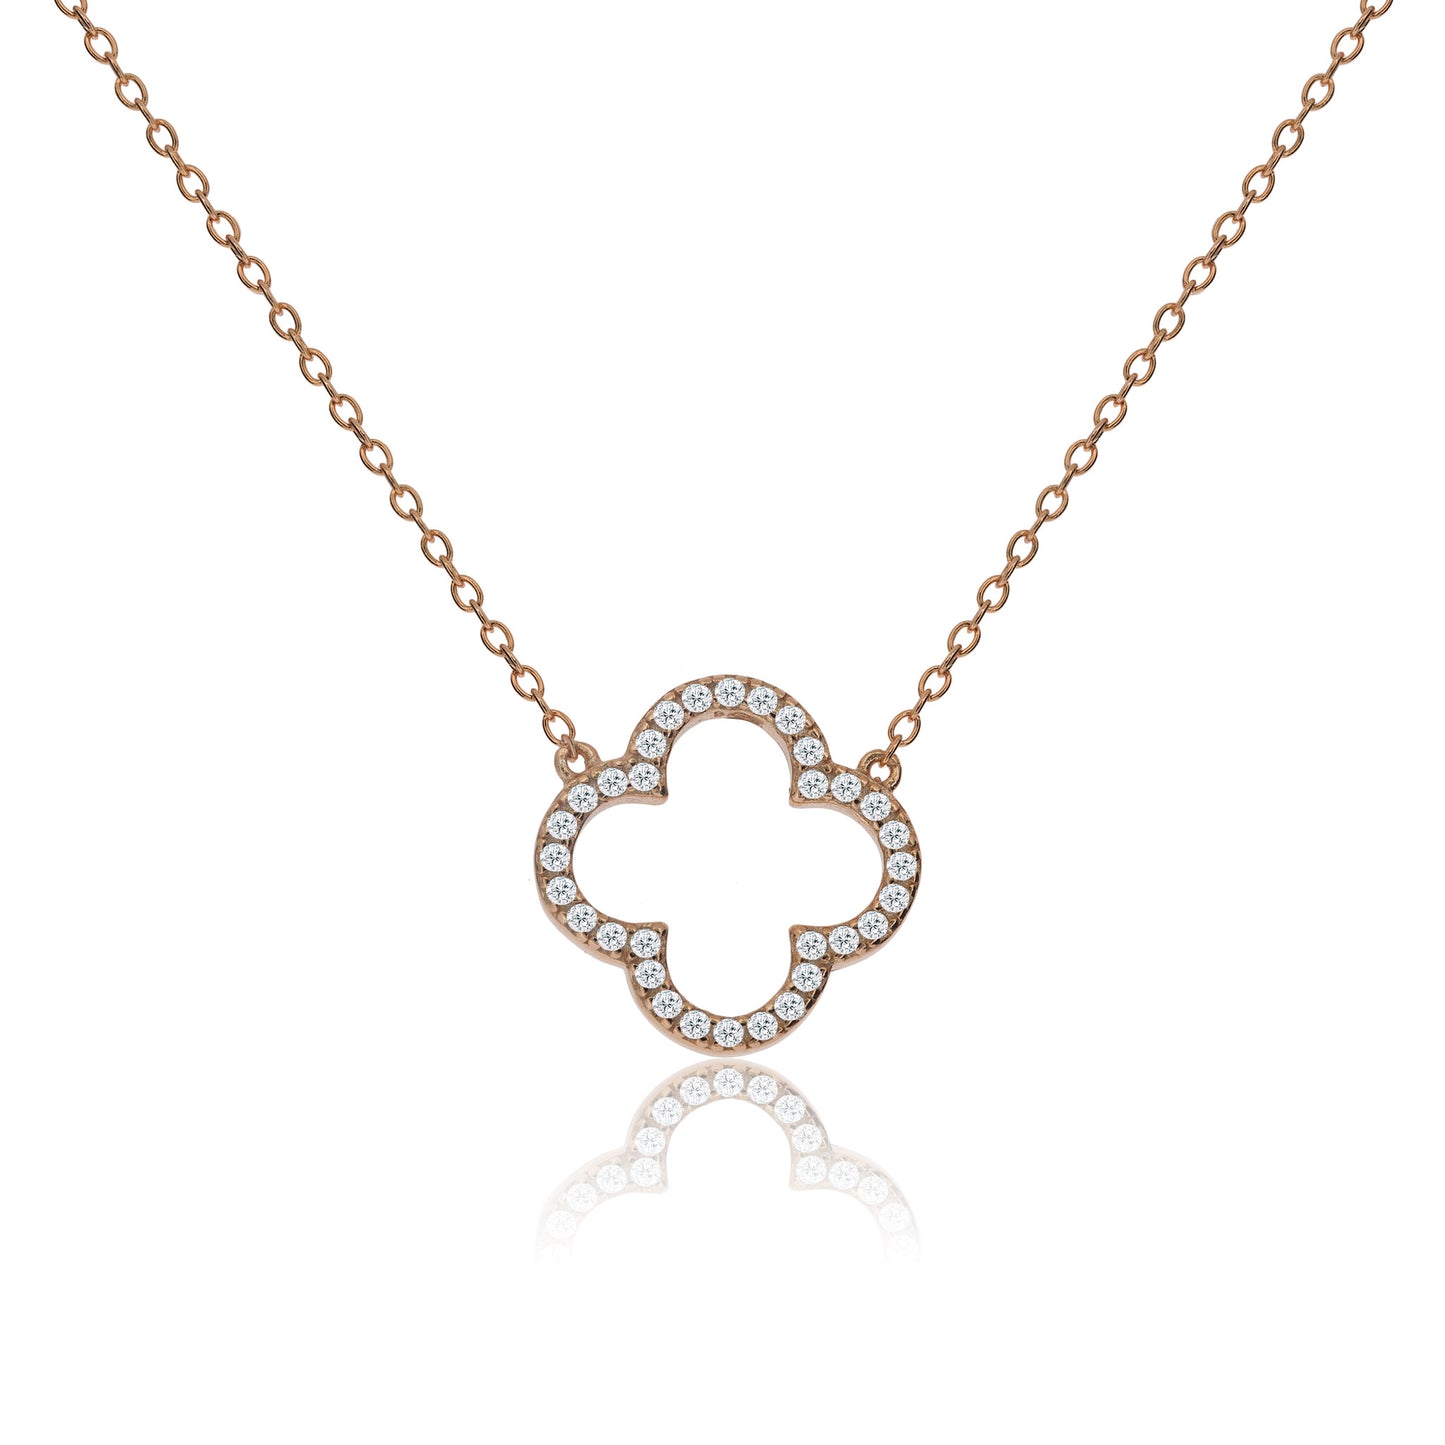 NK-63/R - Chain Necklace with Clover Charm